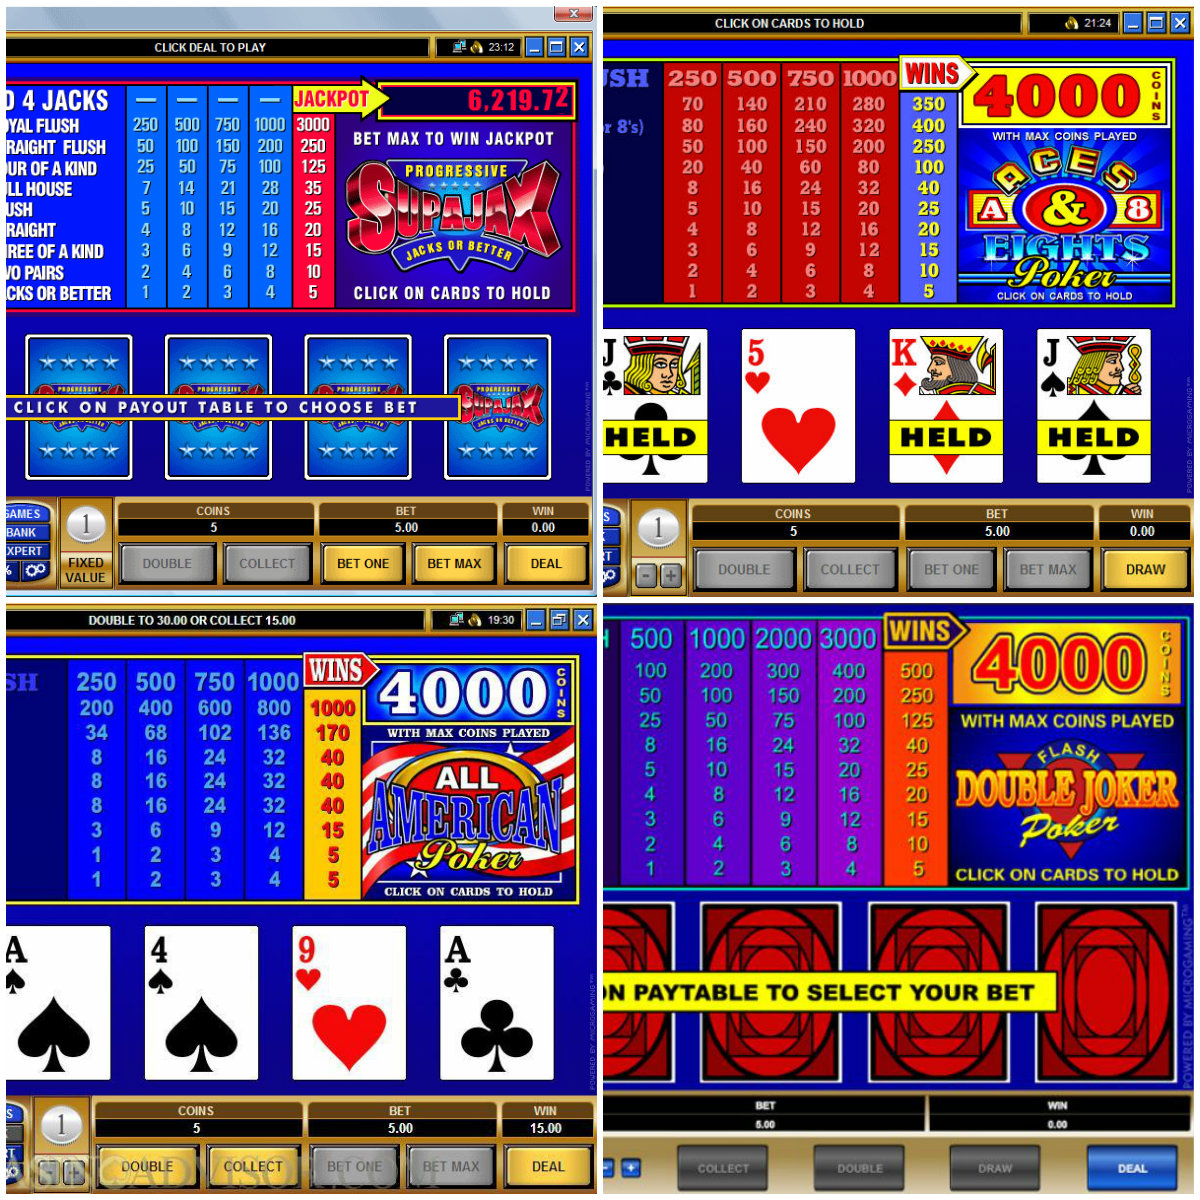 Recommended Video Poker Games from Microgaming